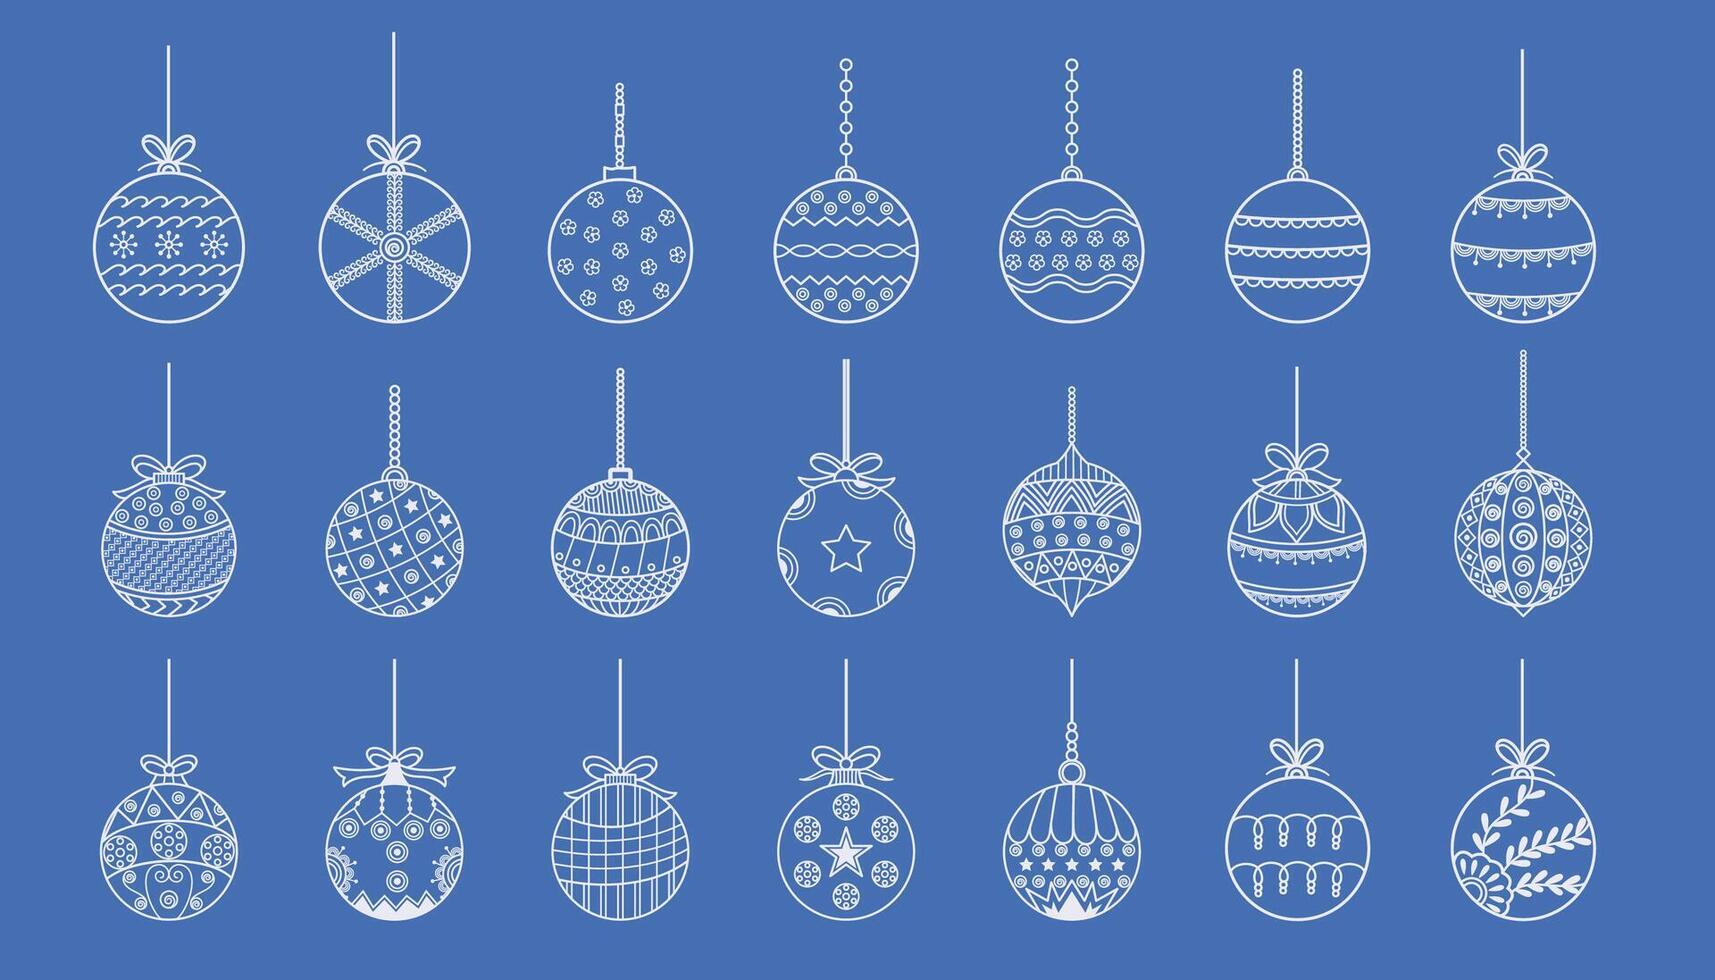 pack of golden christmas bauble ornaments design in line style vector